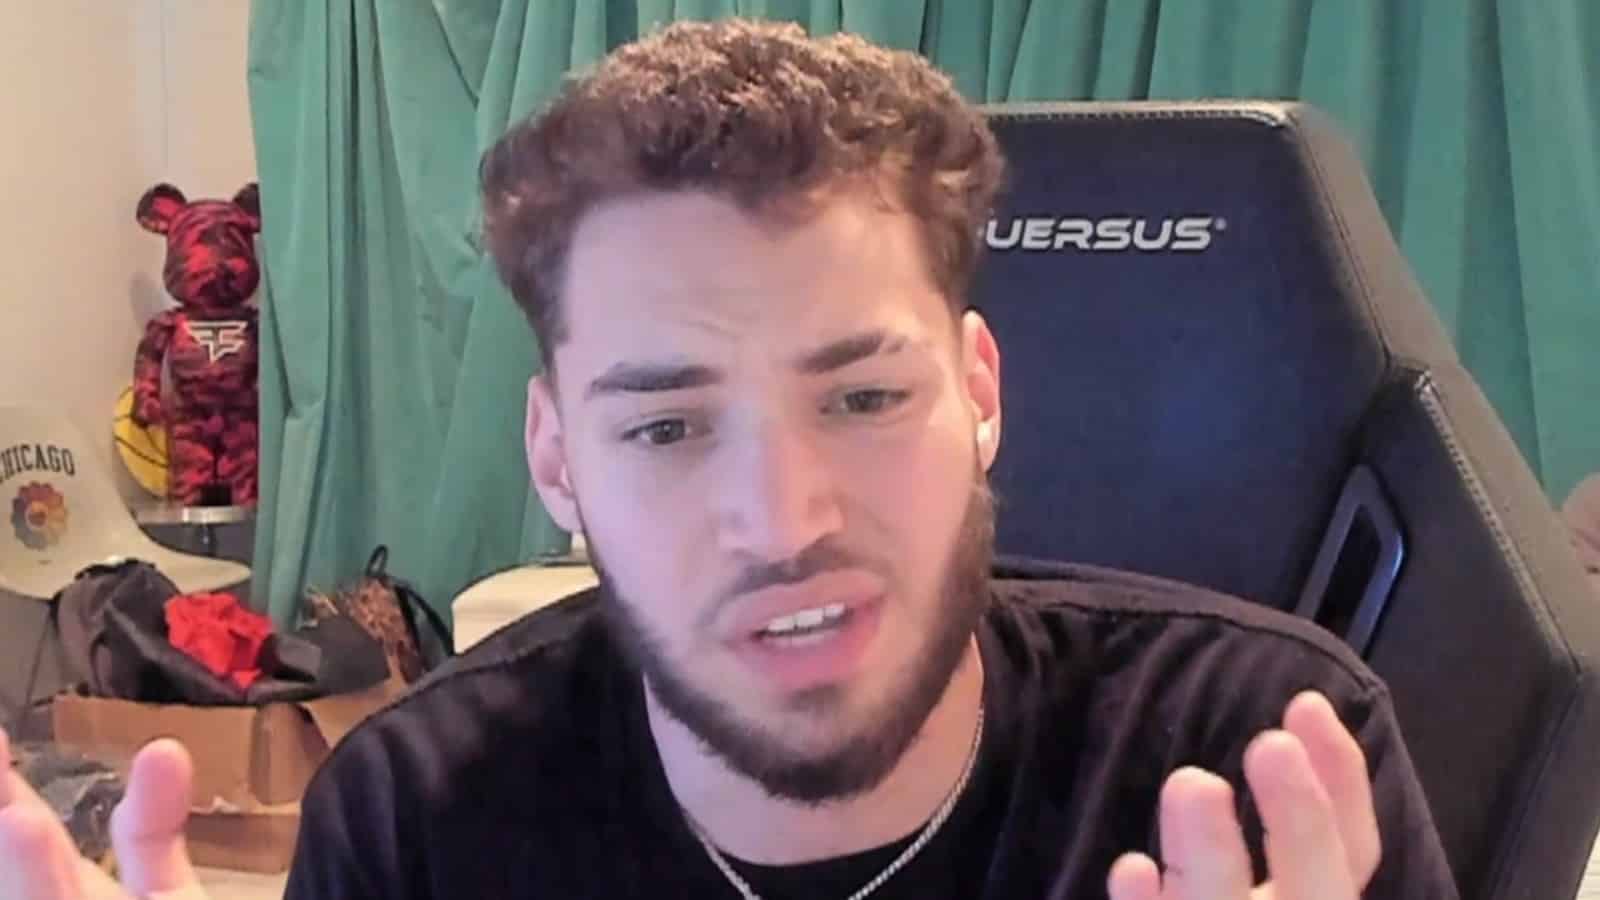 Adin Updates on X: Twitch banned 3 of their biggest black streamers all in  the span of a week.  / X